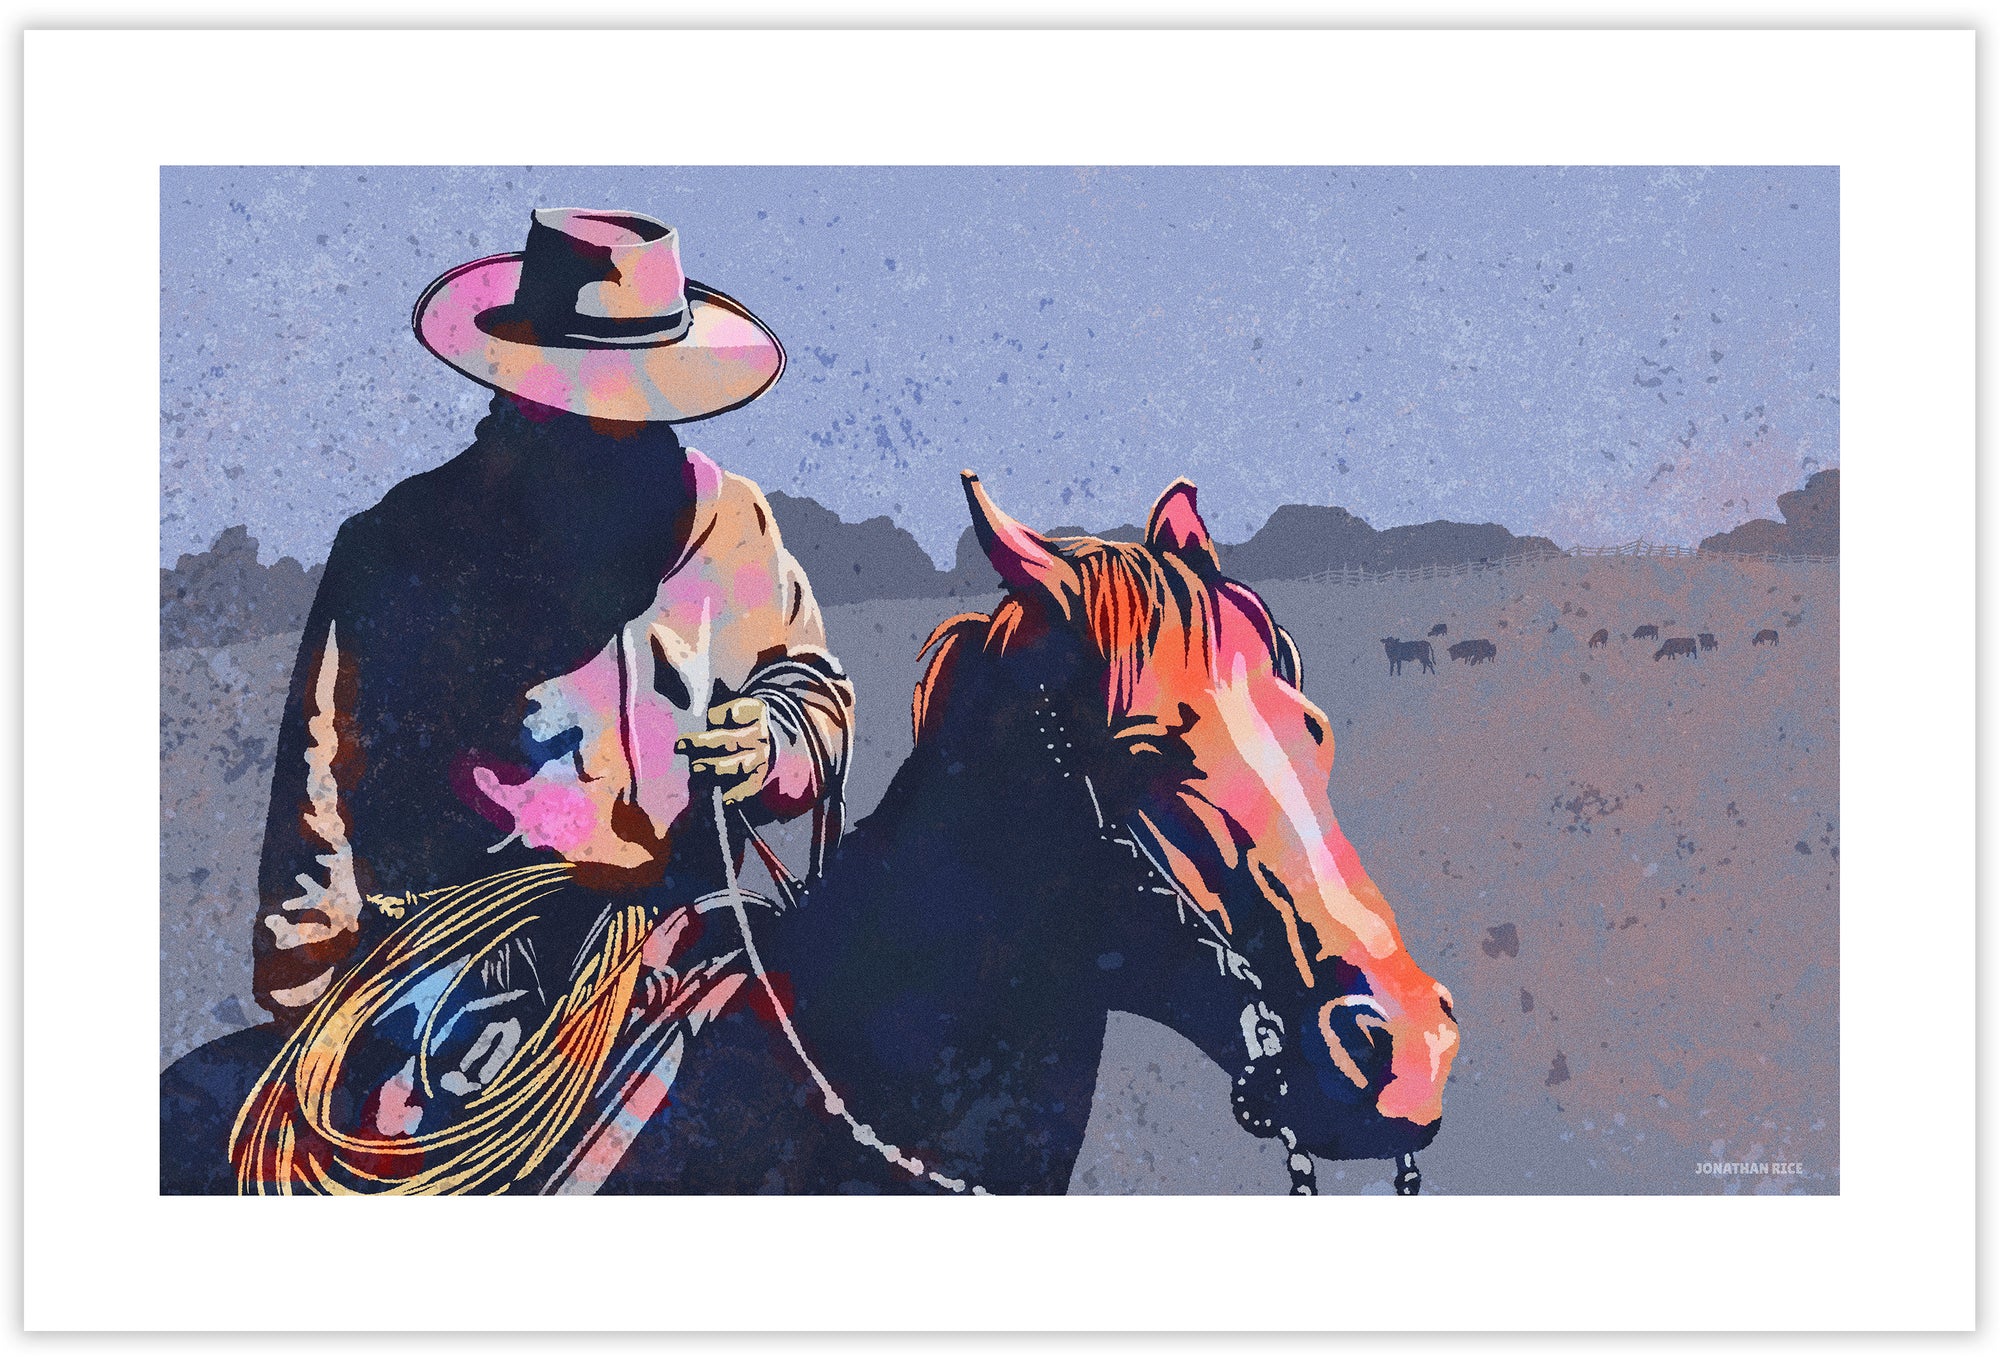 Modern style giclée art print of a Cowboy and his horse on the range. It is brightly colored, yet has gritty texture overall. Their are cows on the range in the distance.